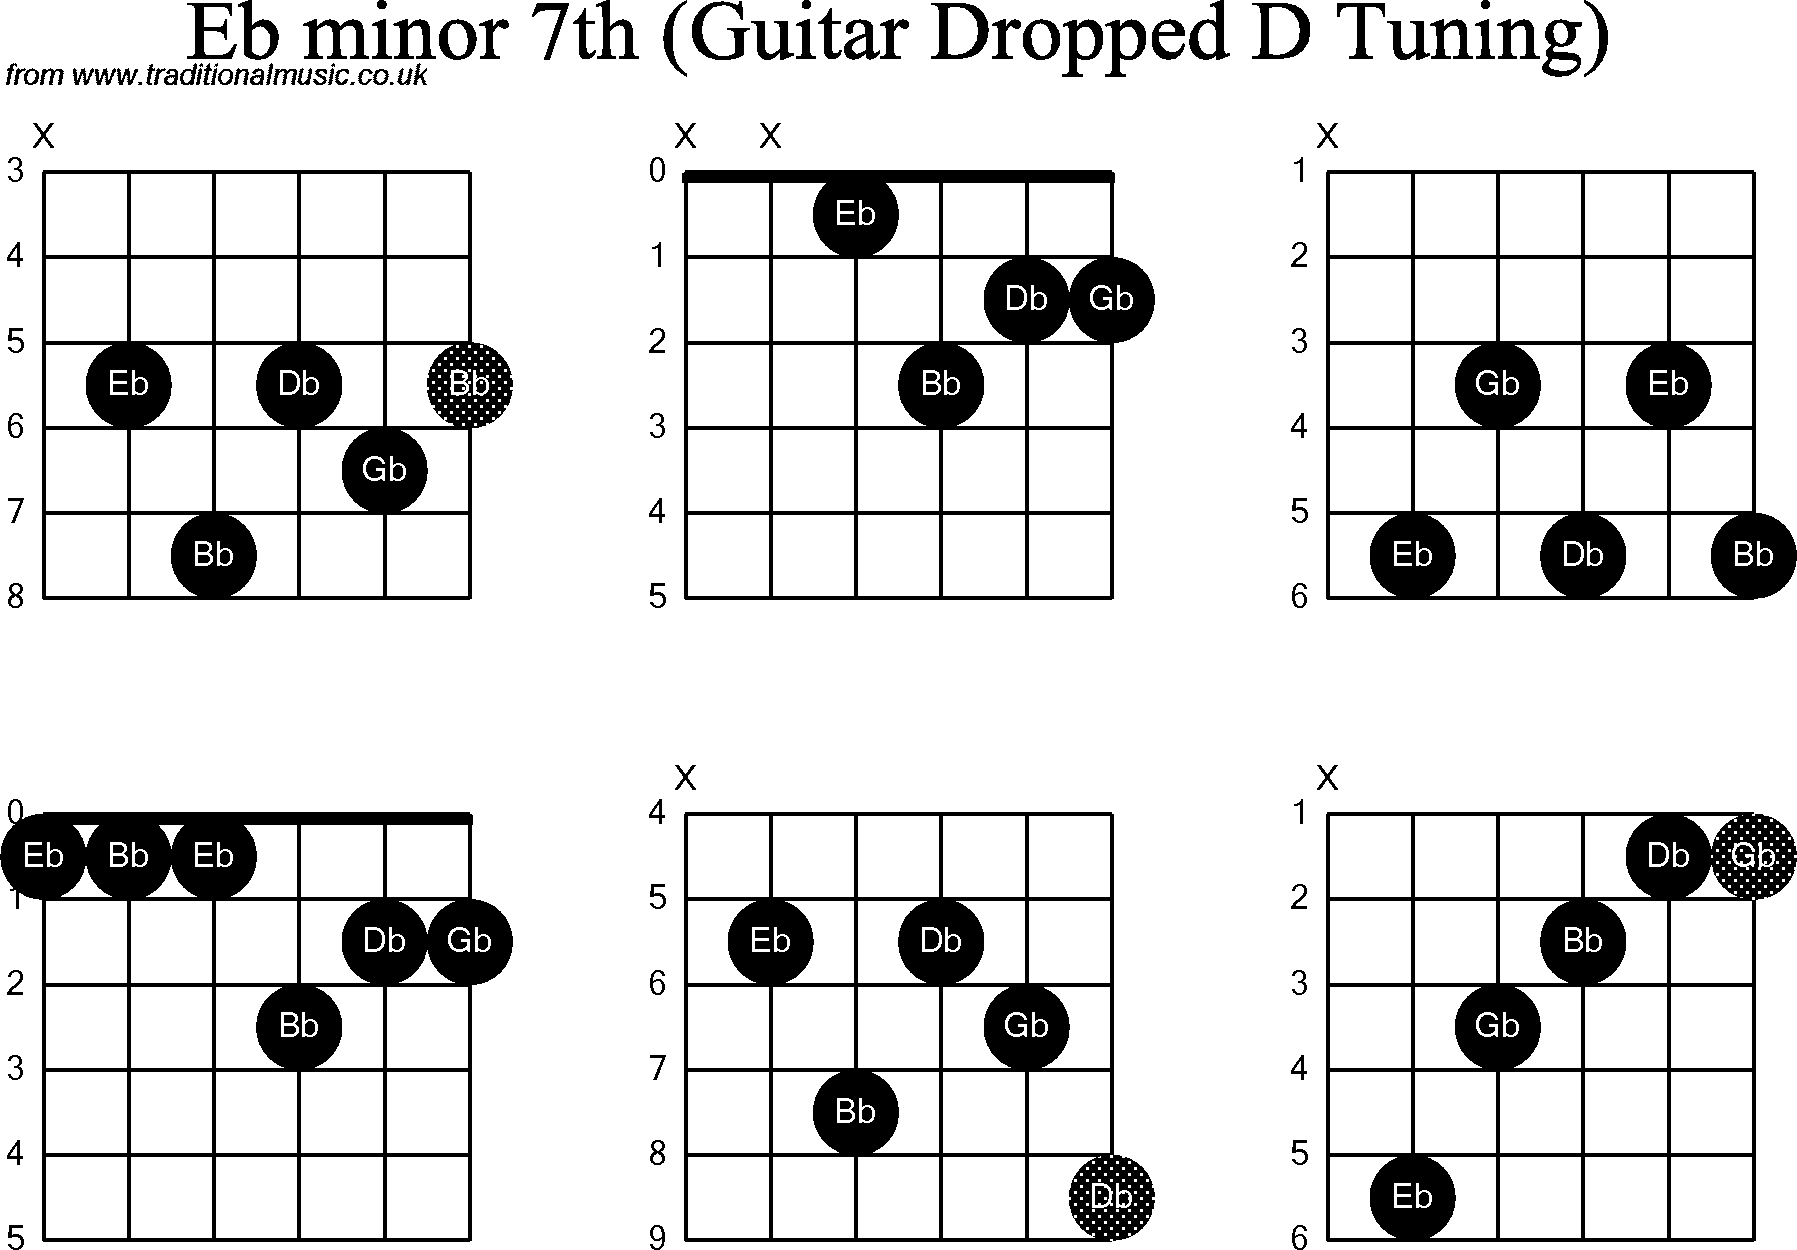 Chord diagrams for dropped D Guitar(DADGBE), Eb Minor7th